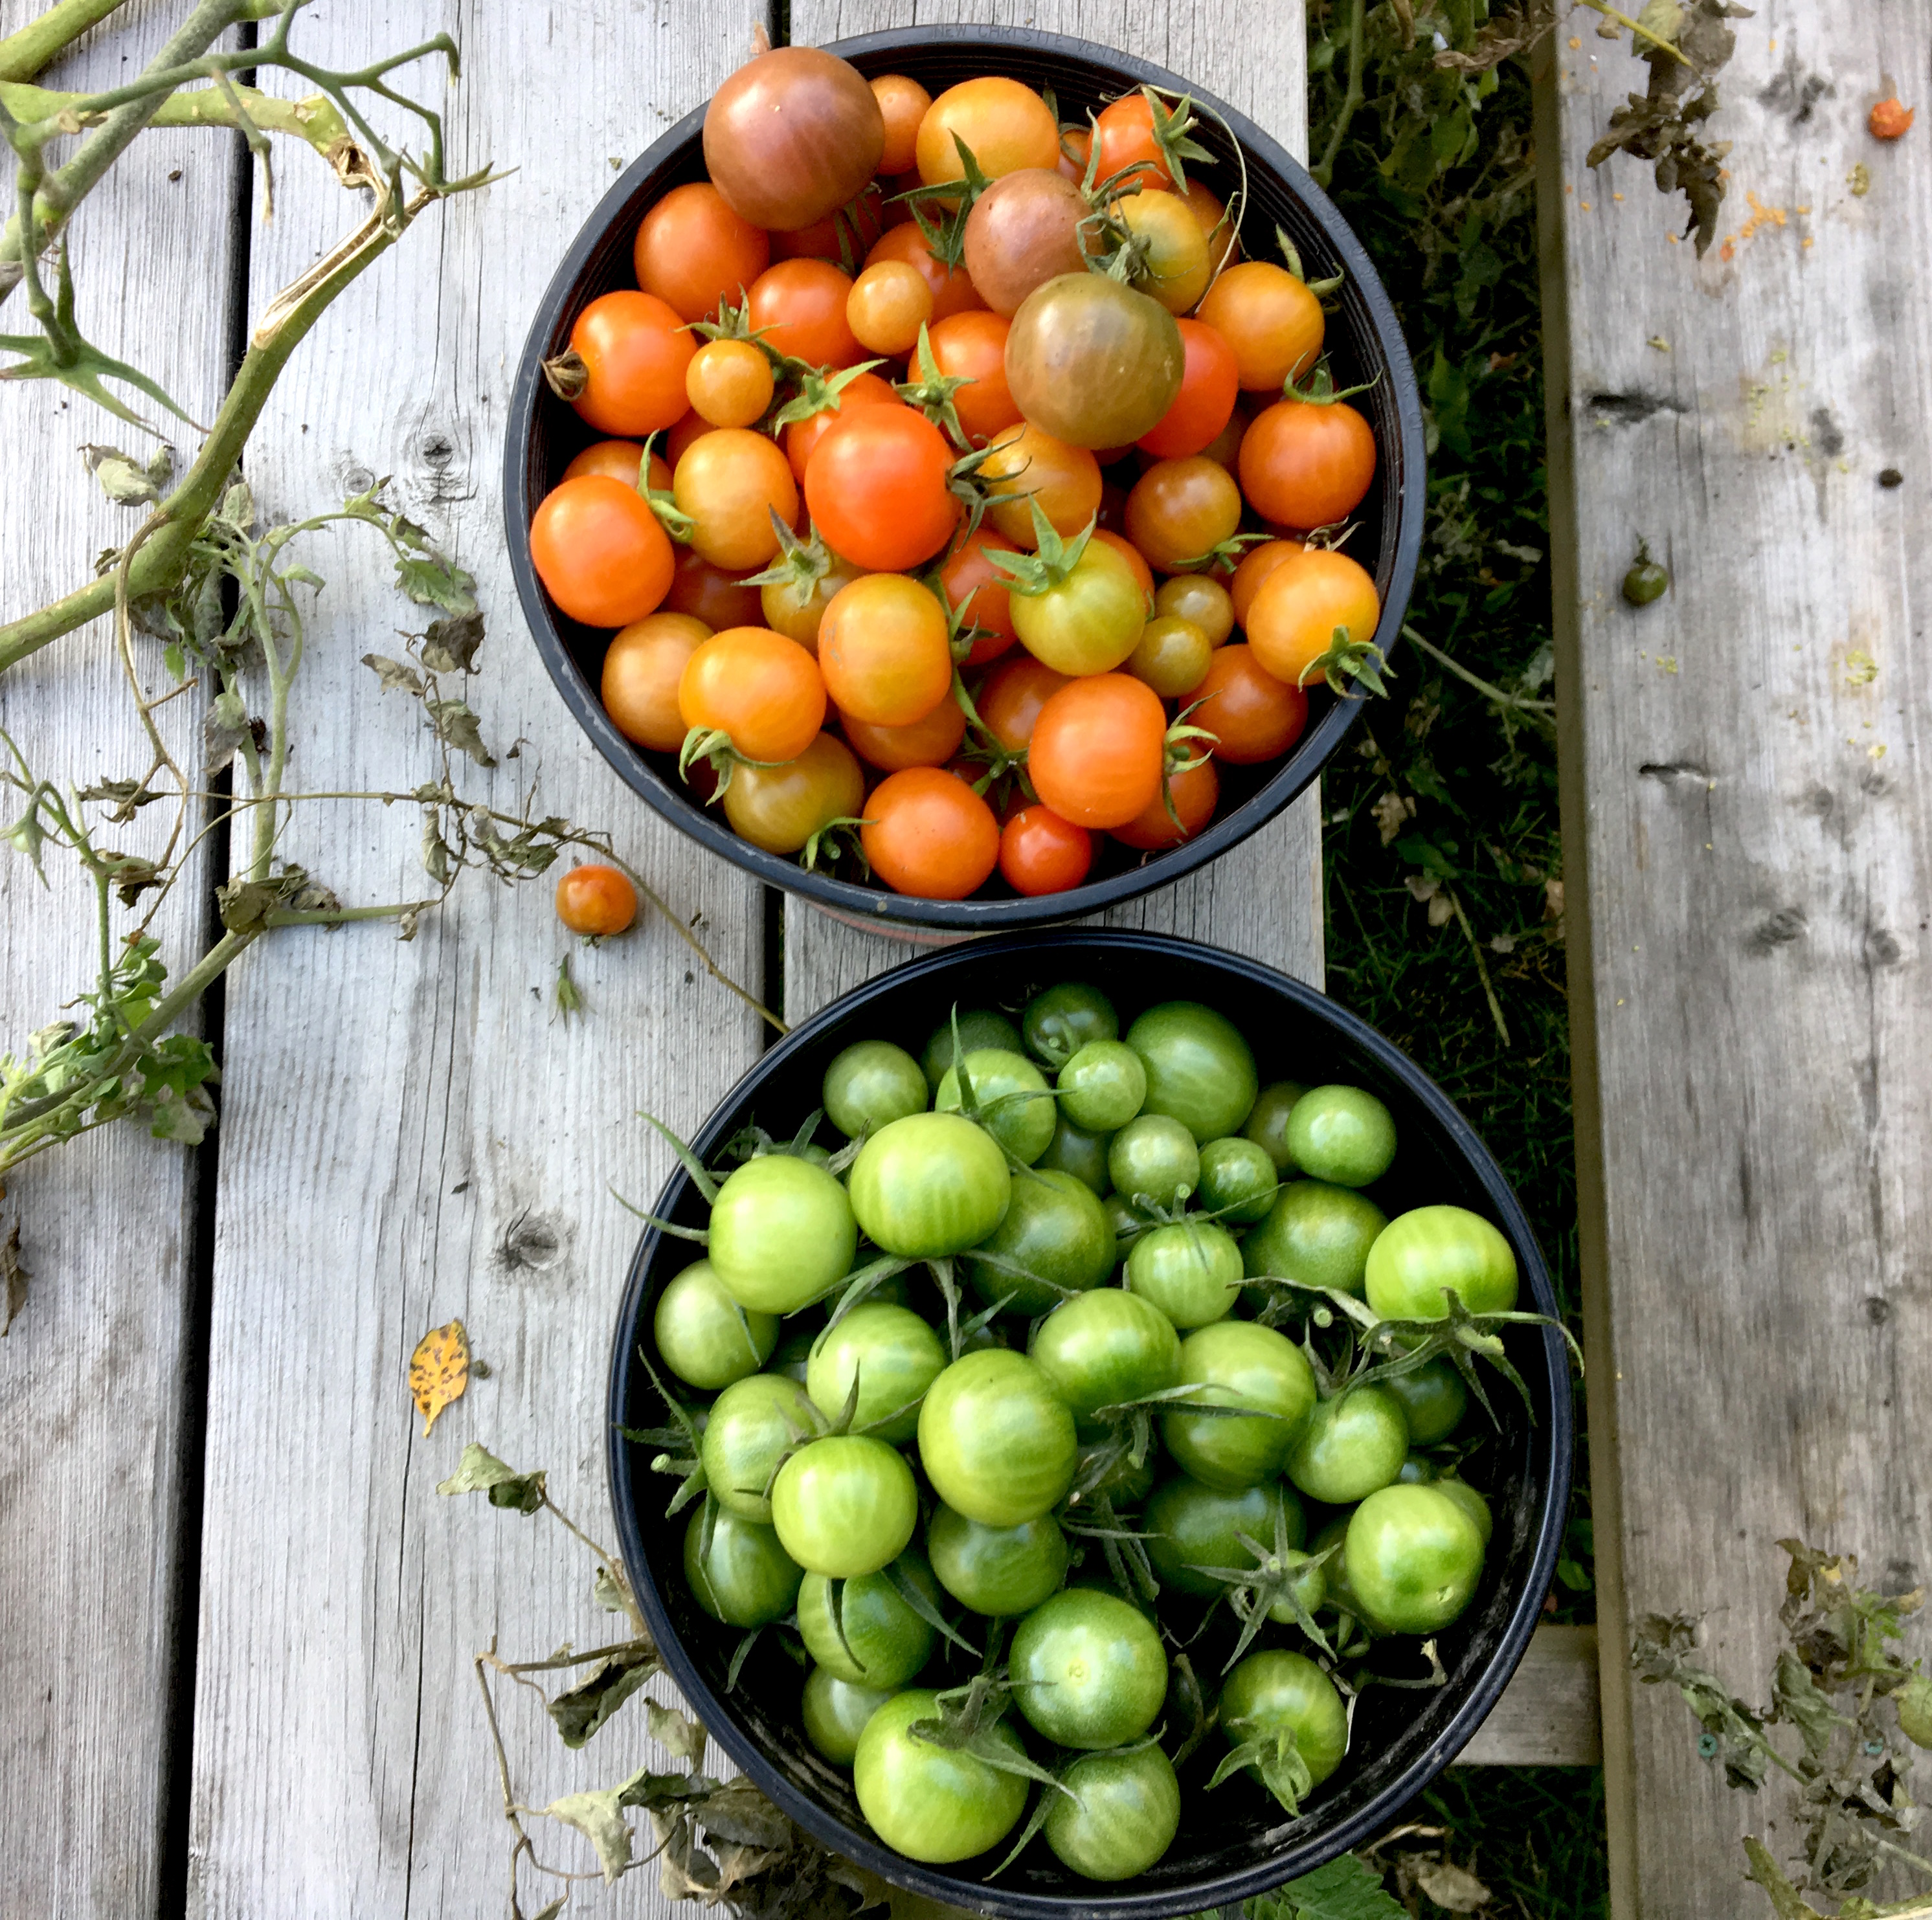 A pale of red cherry tomatoes sits next to a pale of underripe, green tomatoes on a wooden picnic table. 